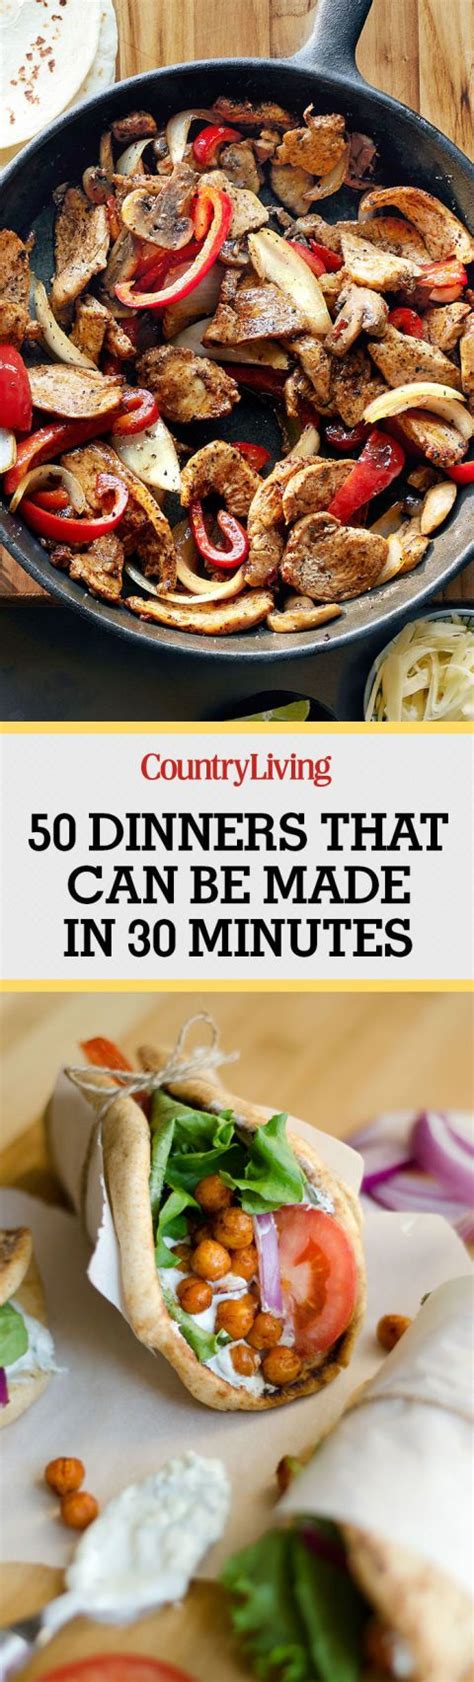 3264 best dinner ideas images on pinterest easy cooking easy food recipes and easy recipes